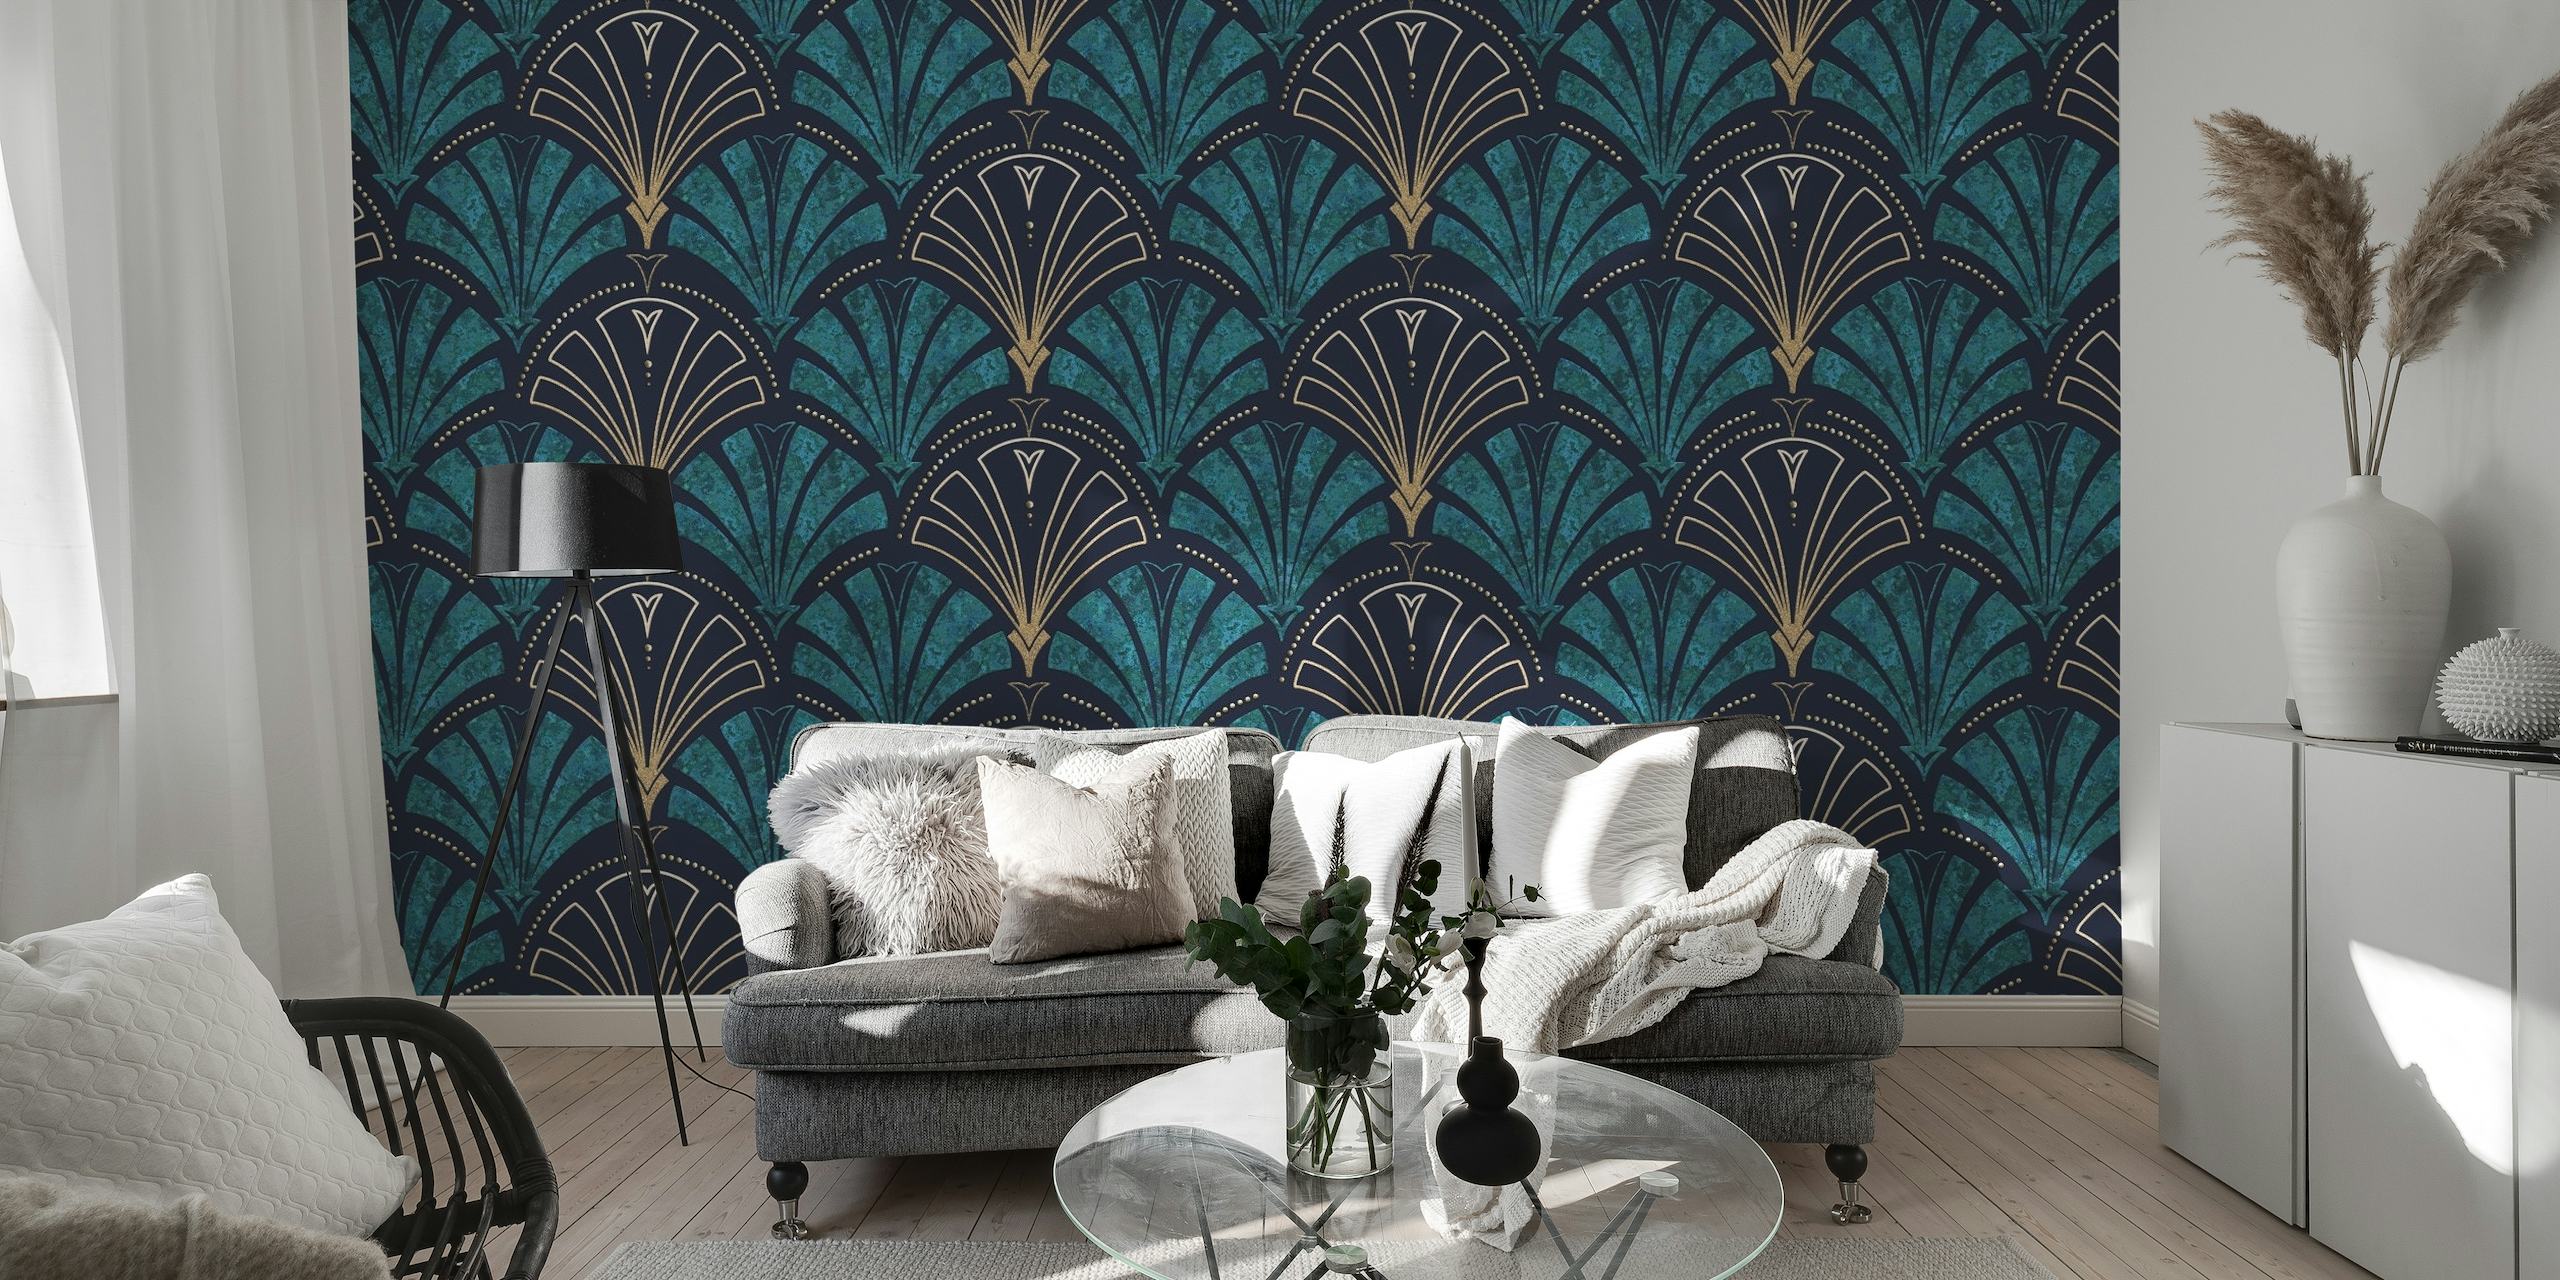 192s Gatsby-Inspired Gold and Teal Art Deco Wallpaper